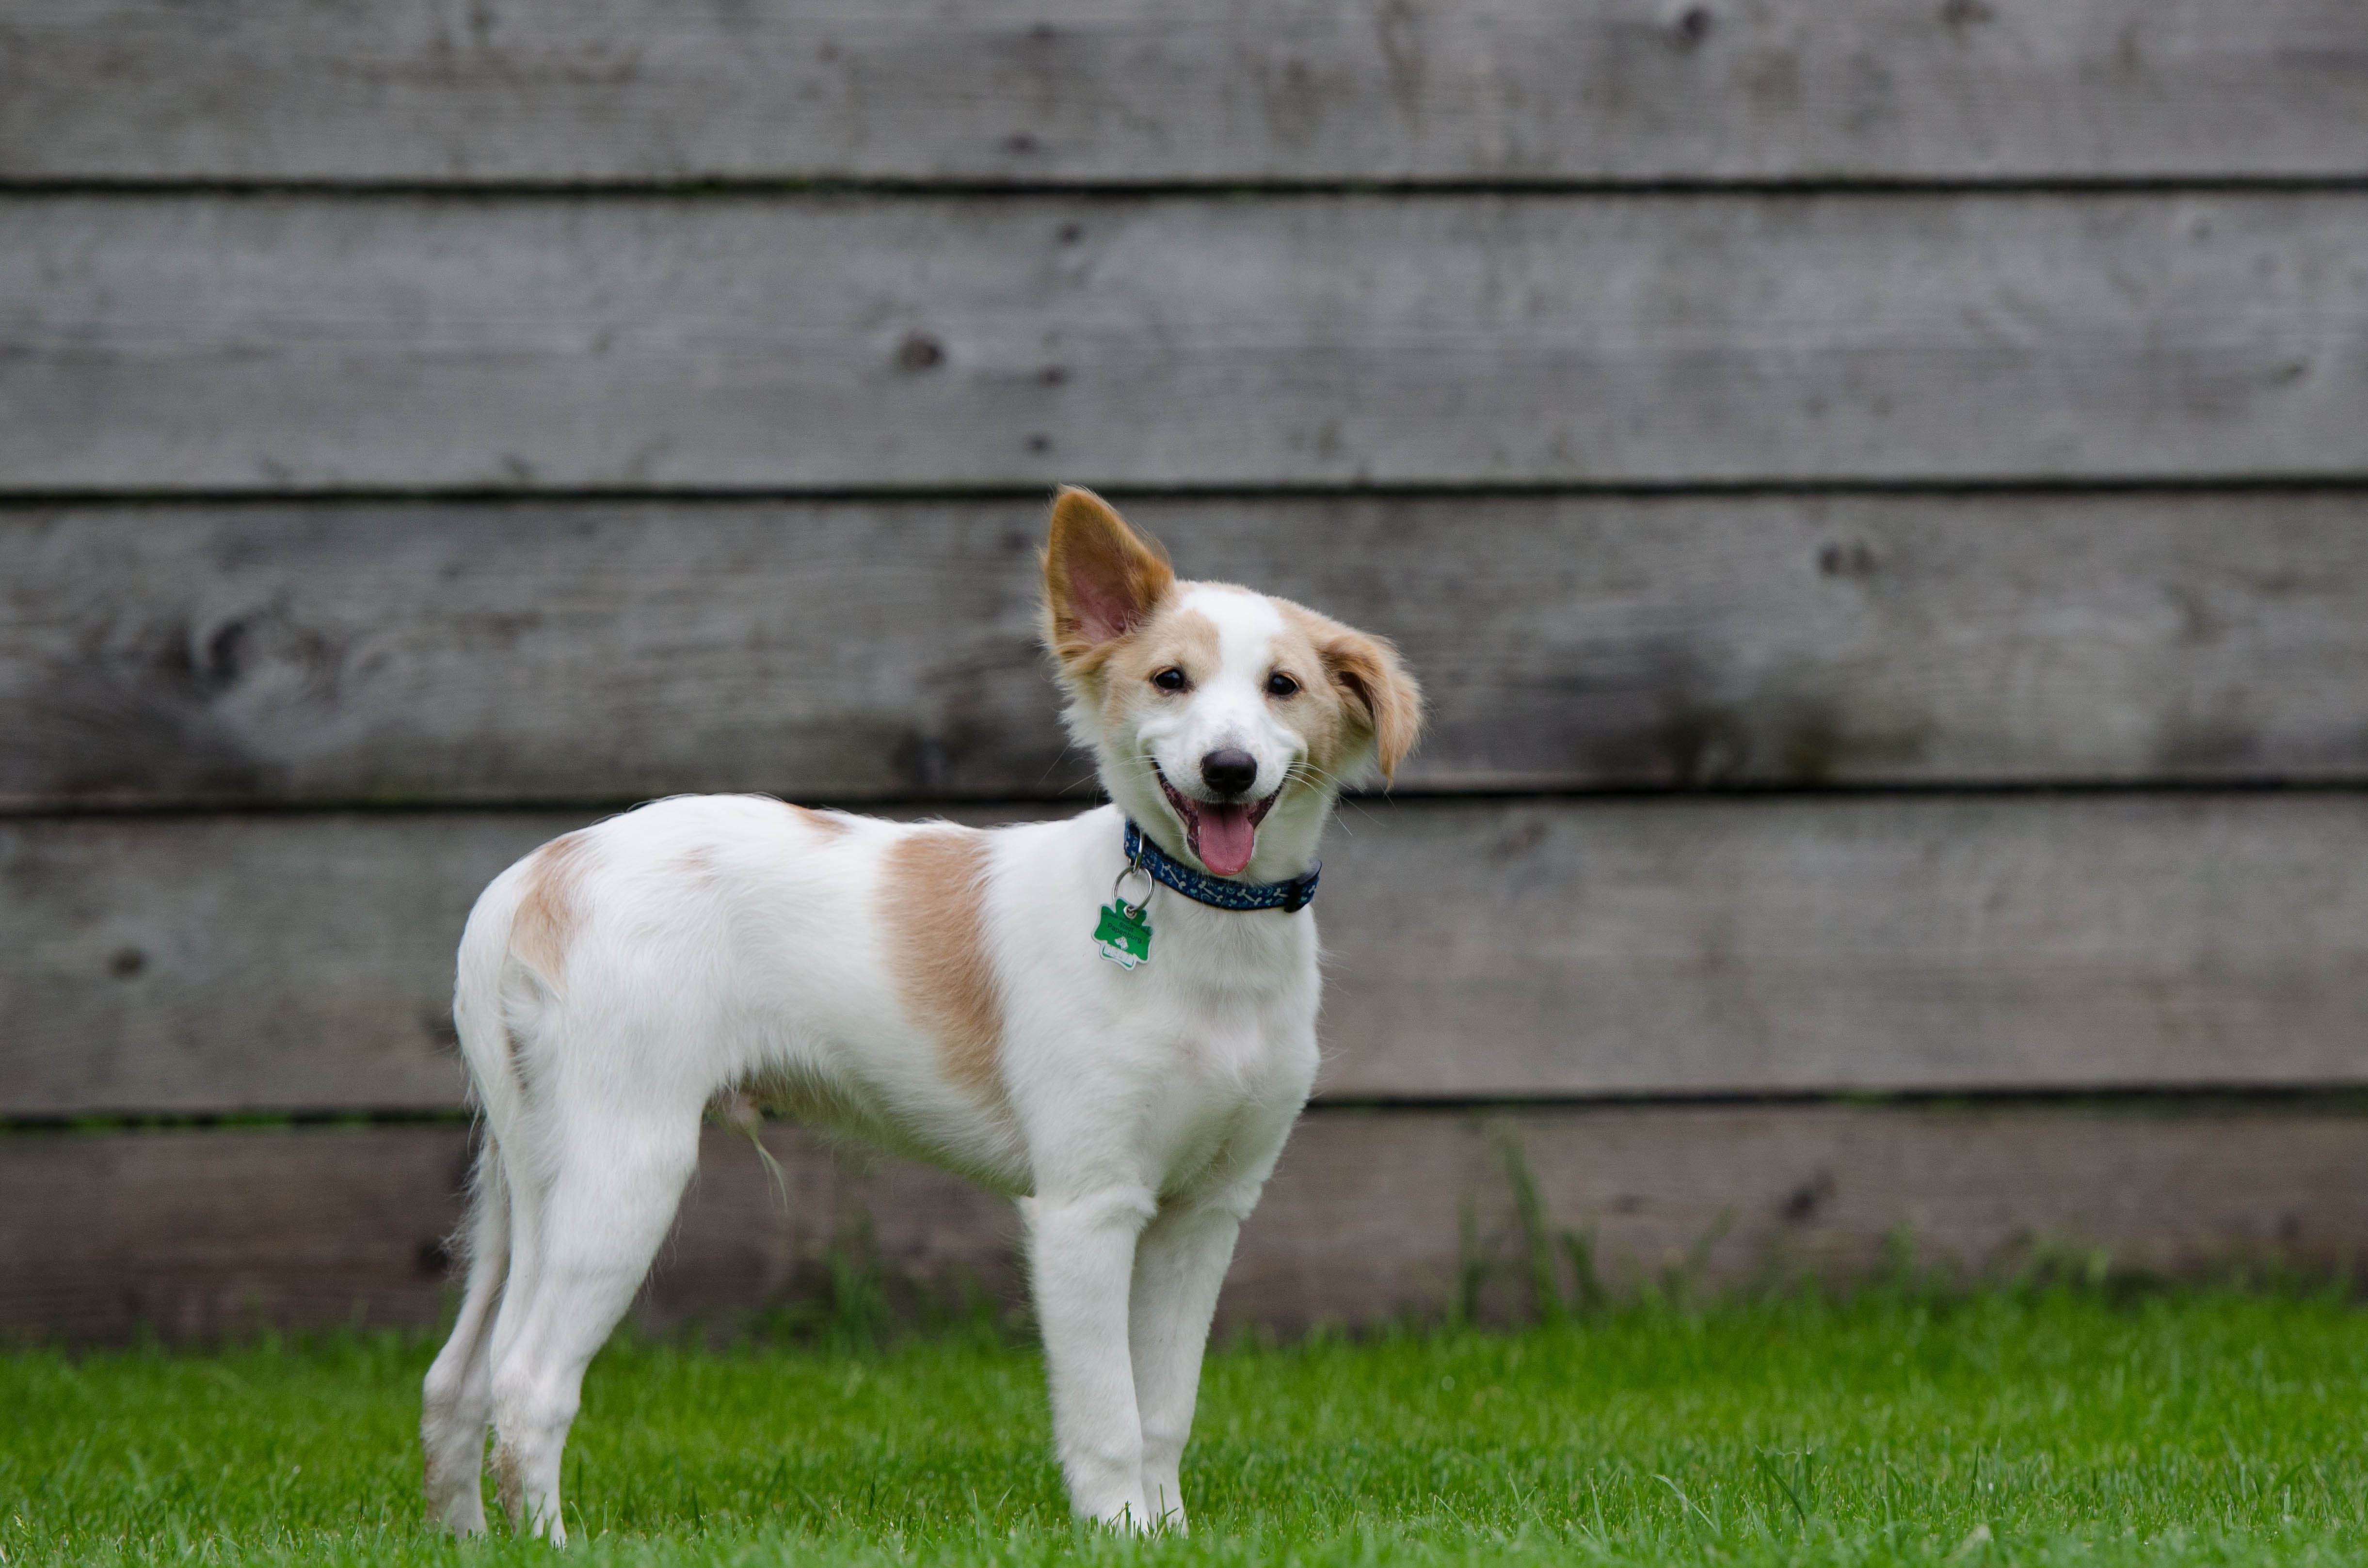 white and brown short coated dog standing on green grass lawn near gray wooden fence